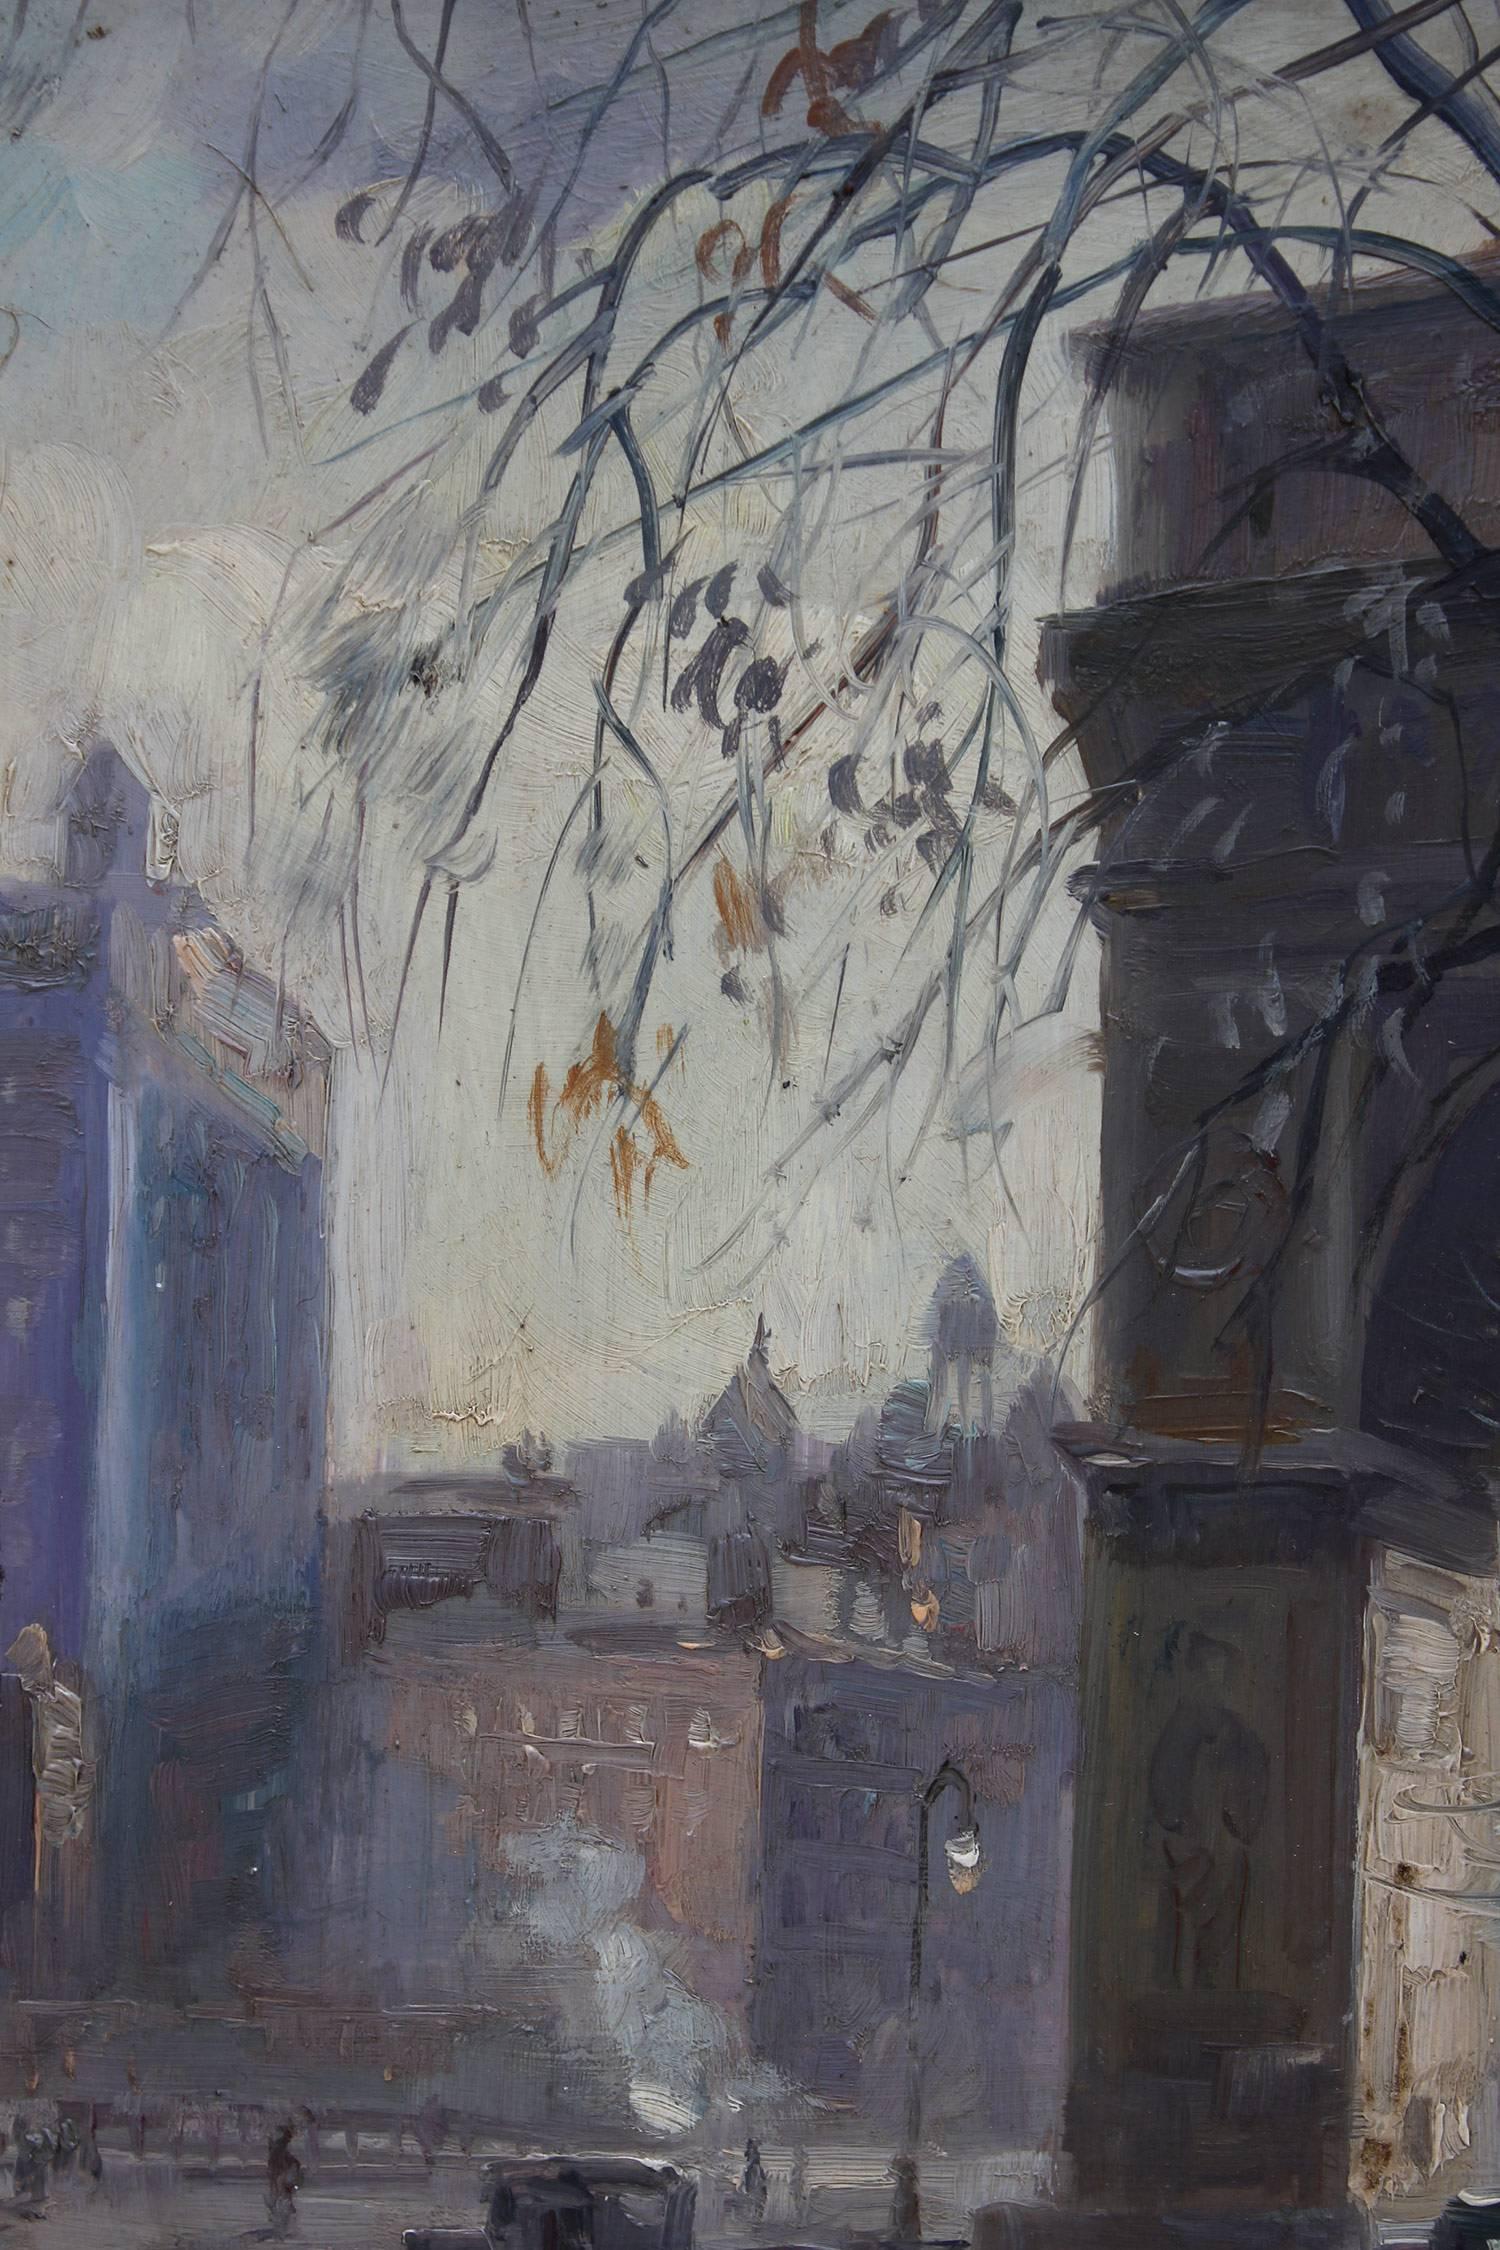 Rainy Day in Washington Square Park - Impressionist Painting by Alfred S. Mira